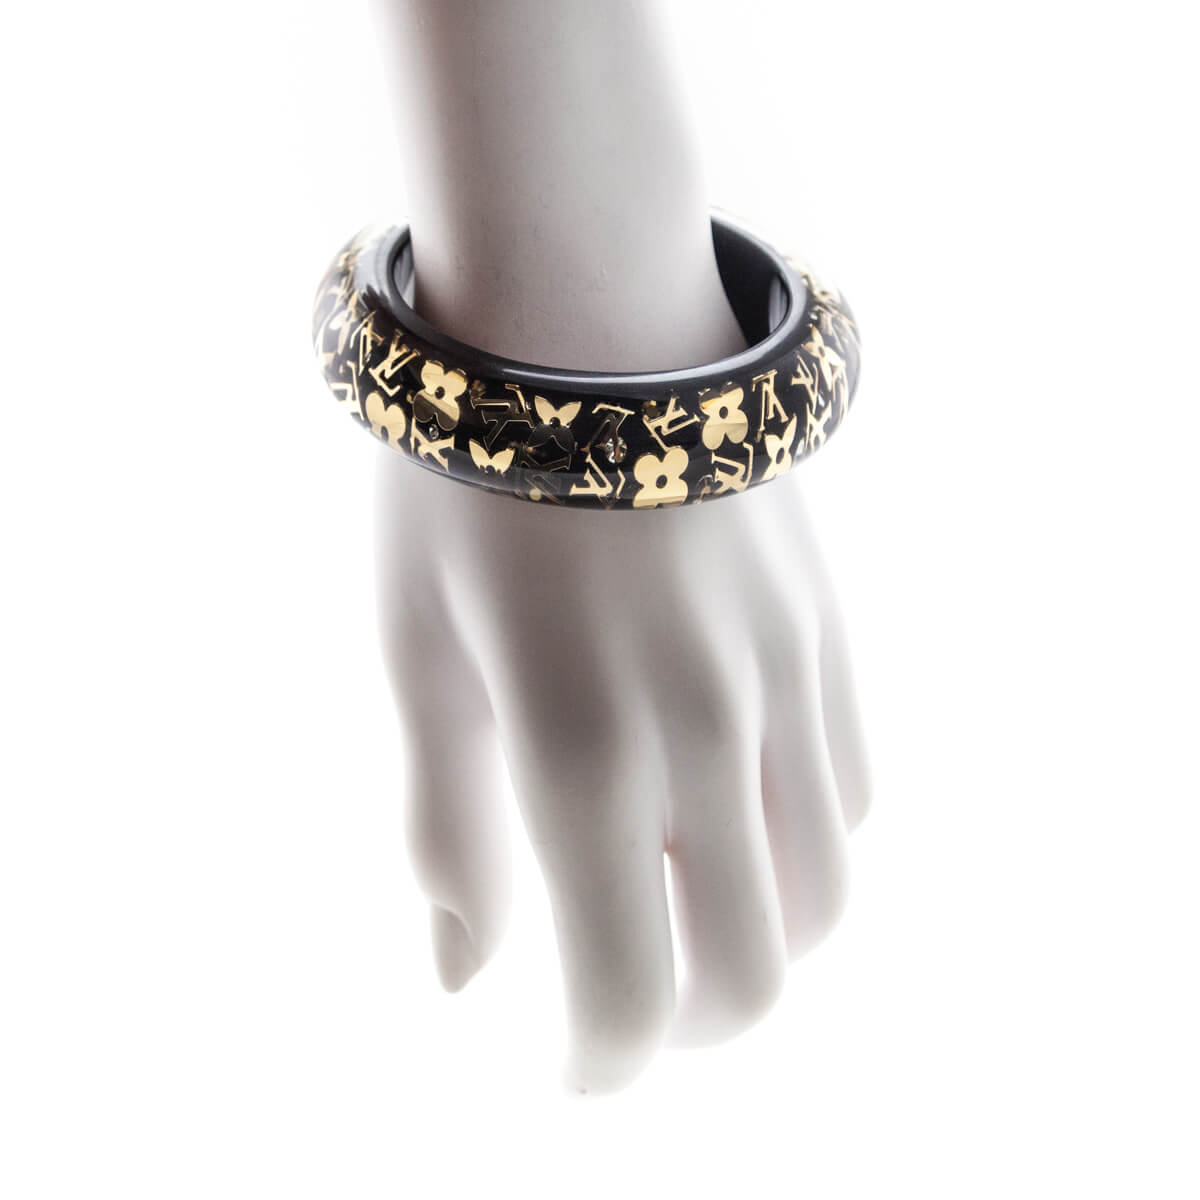 Louis Vuitton Bangle Inclusion Black and Gold, 2013 For Sale at